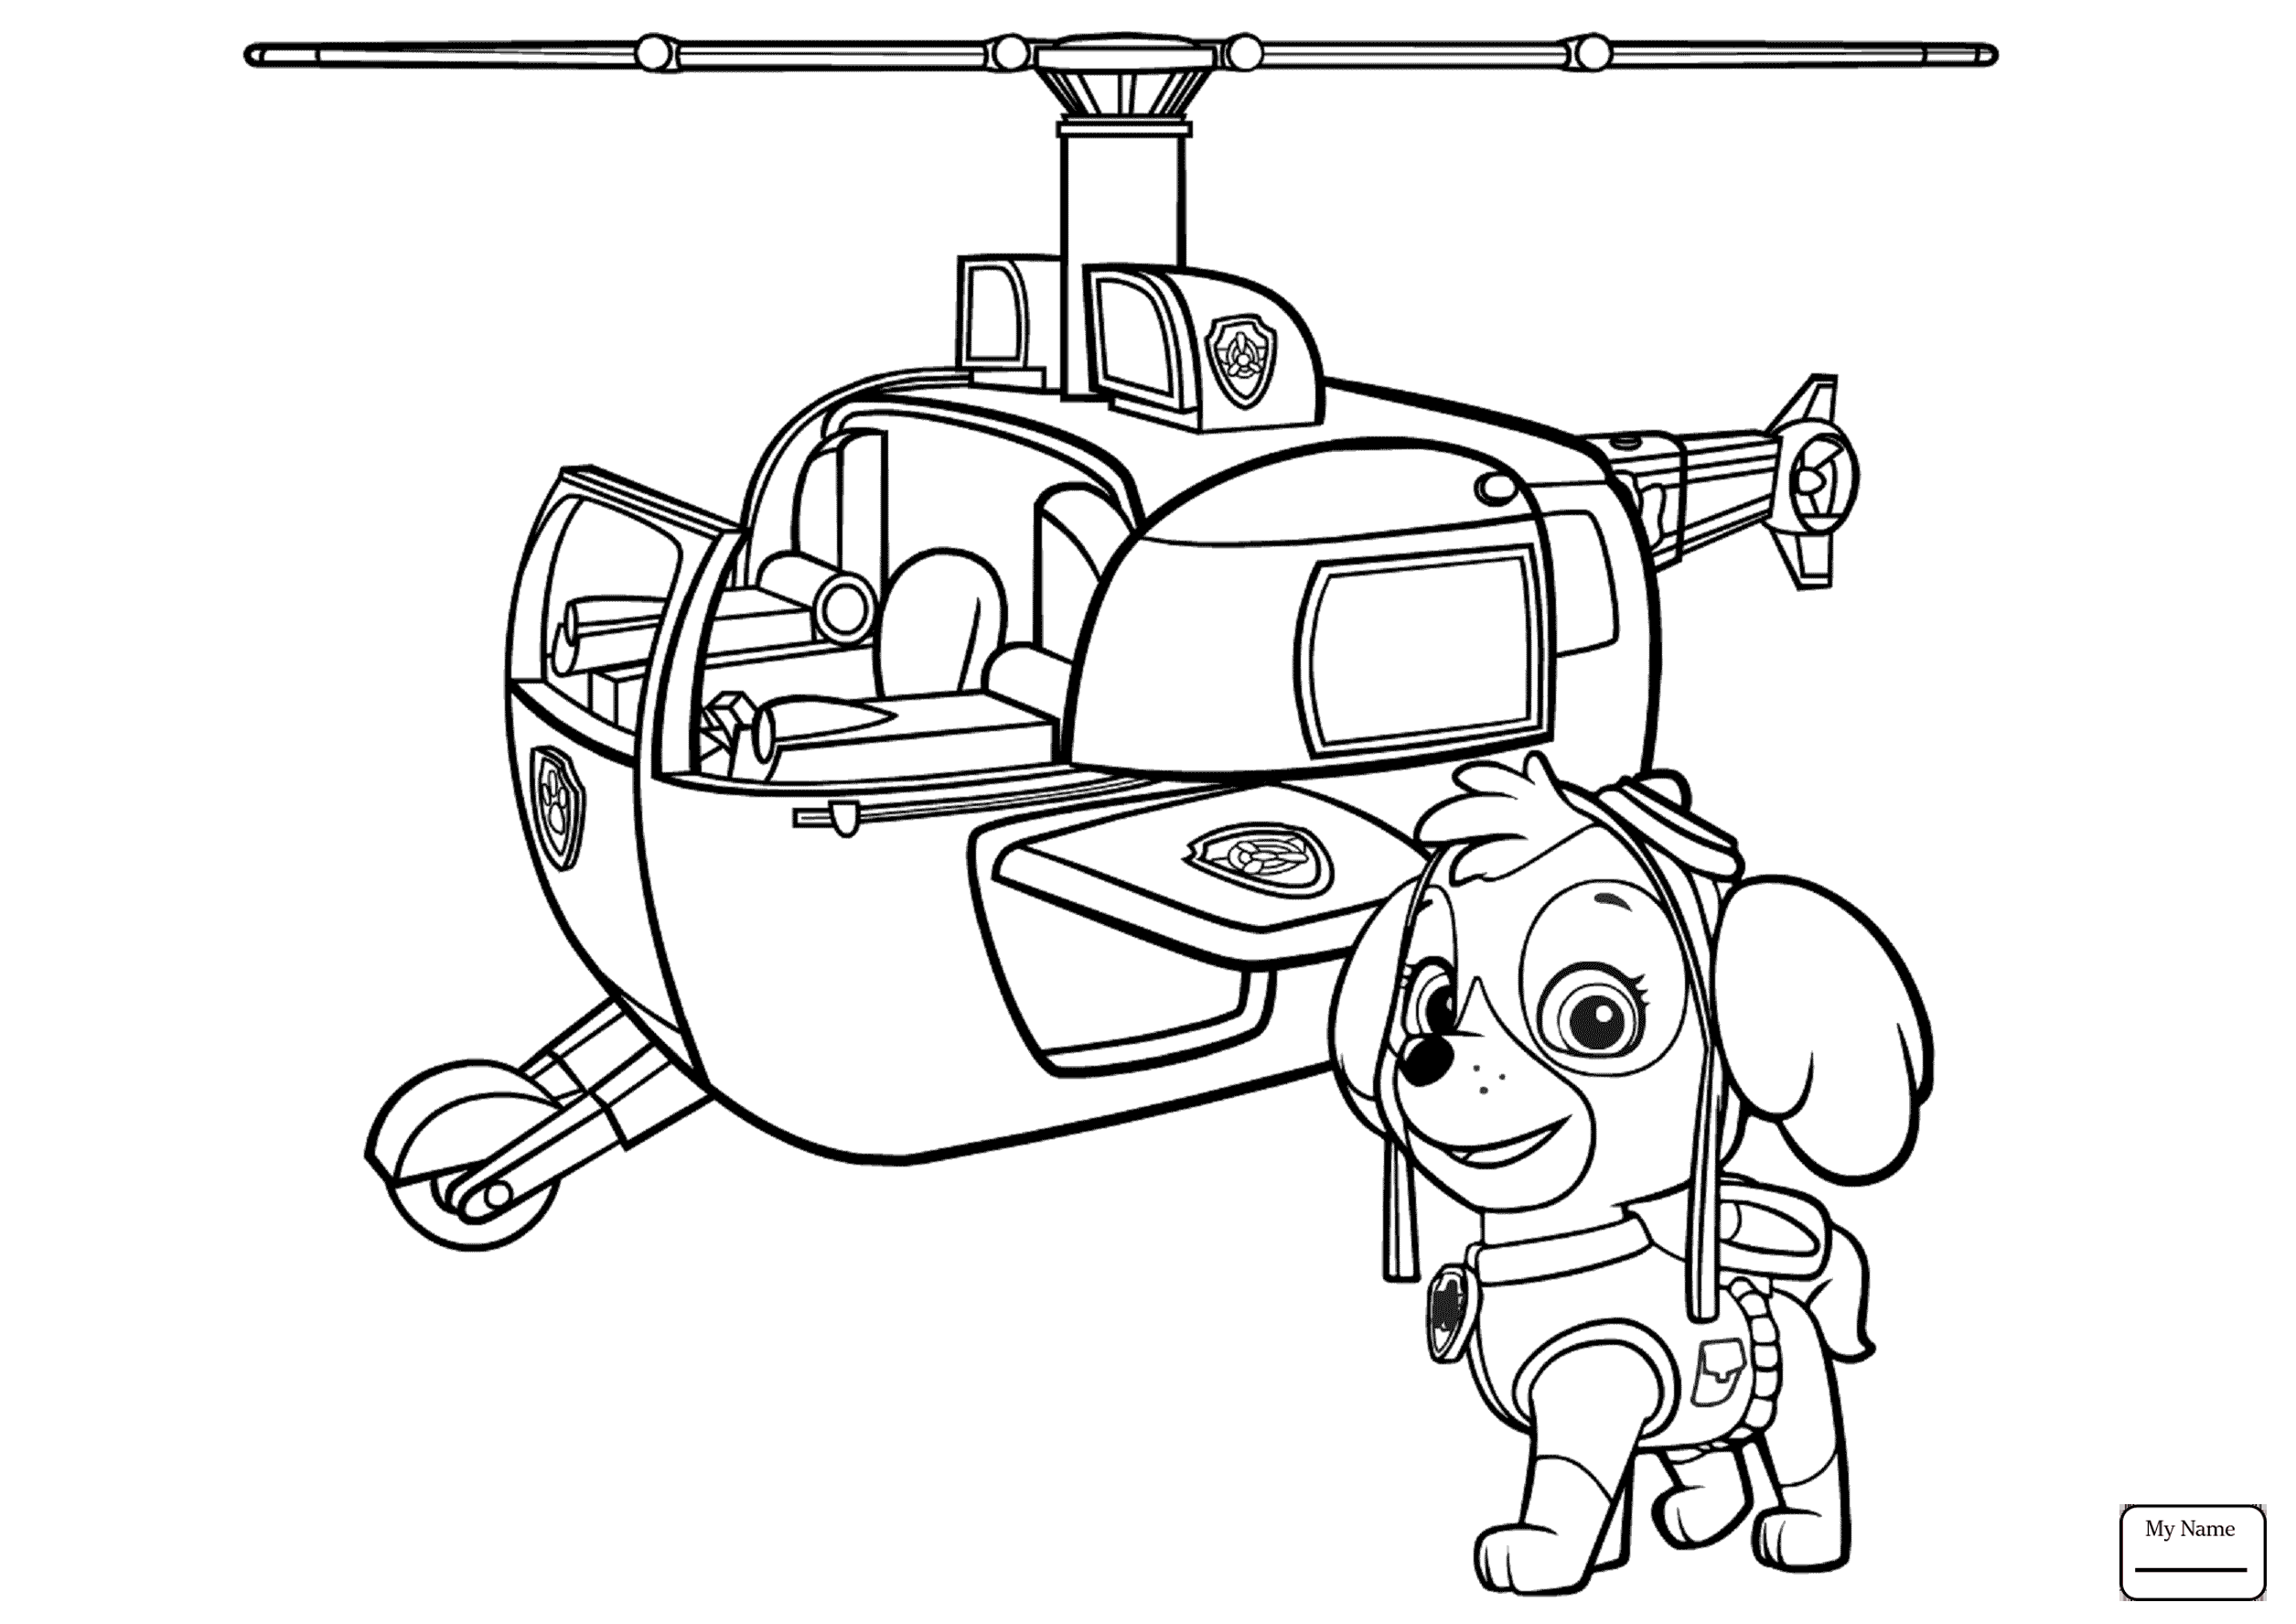 Paw Patrol Everest Coloring Page at GetColorings.com | Free printable